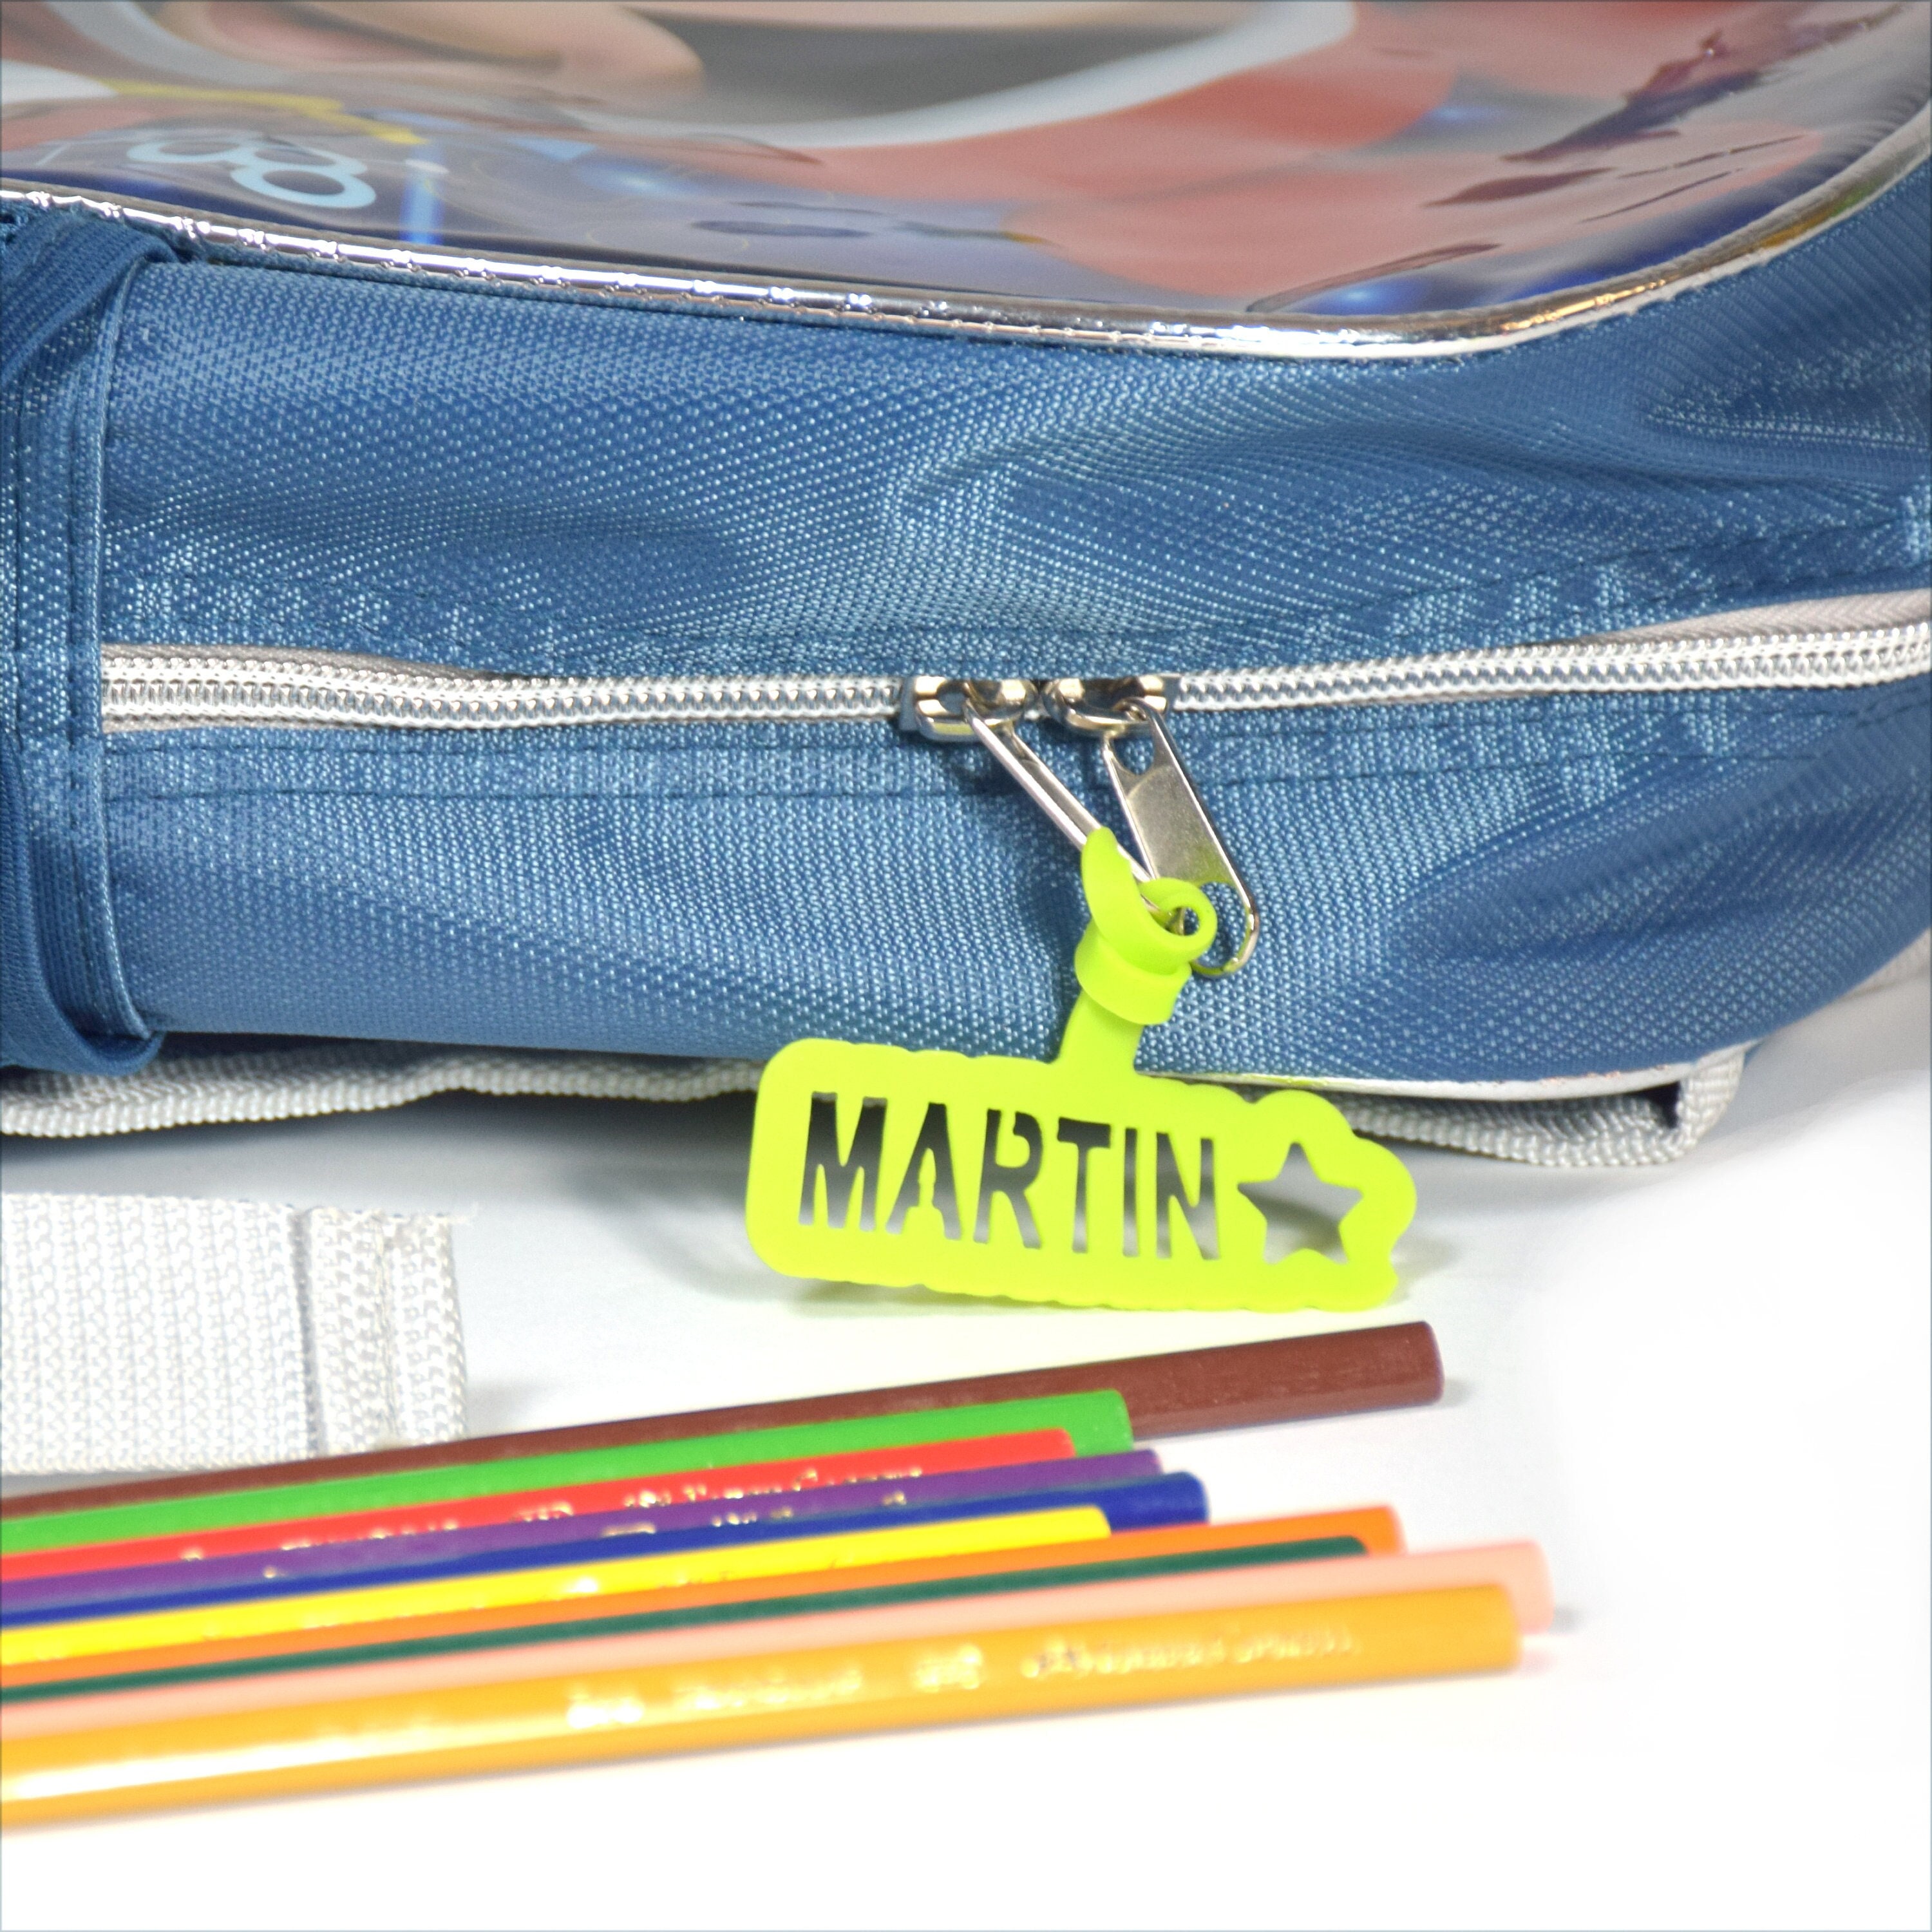 Backpack Name Tag, Custom Silicone Label For Pouch, Book Bag, Diaper Purse, Gym Sport Pencil Case. Pack Of 2. Back To School